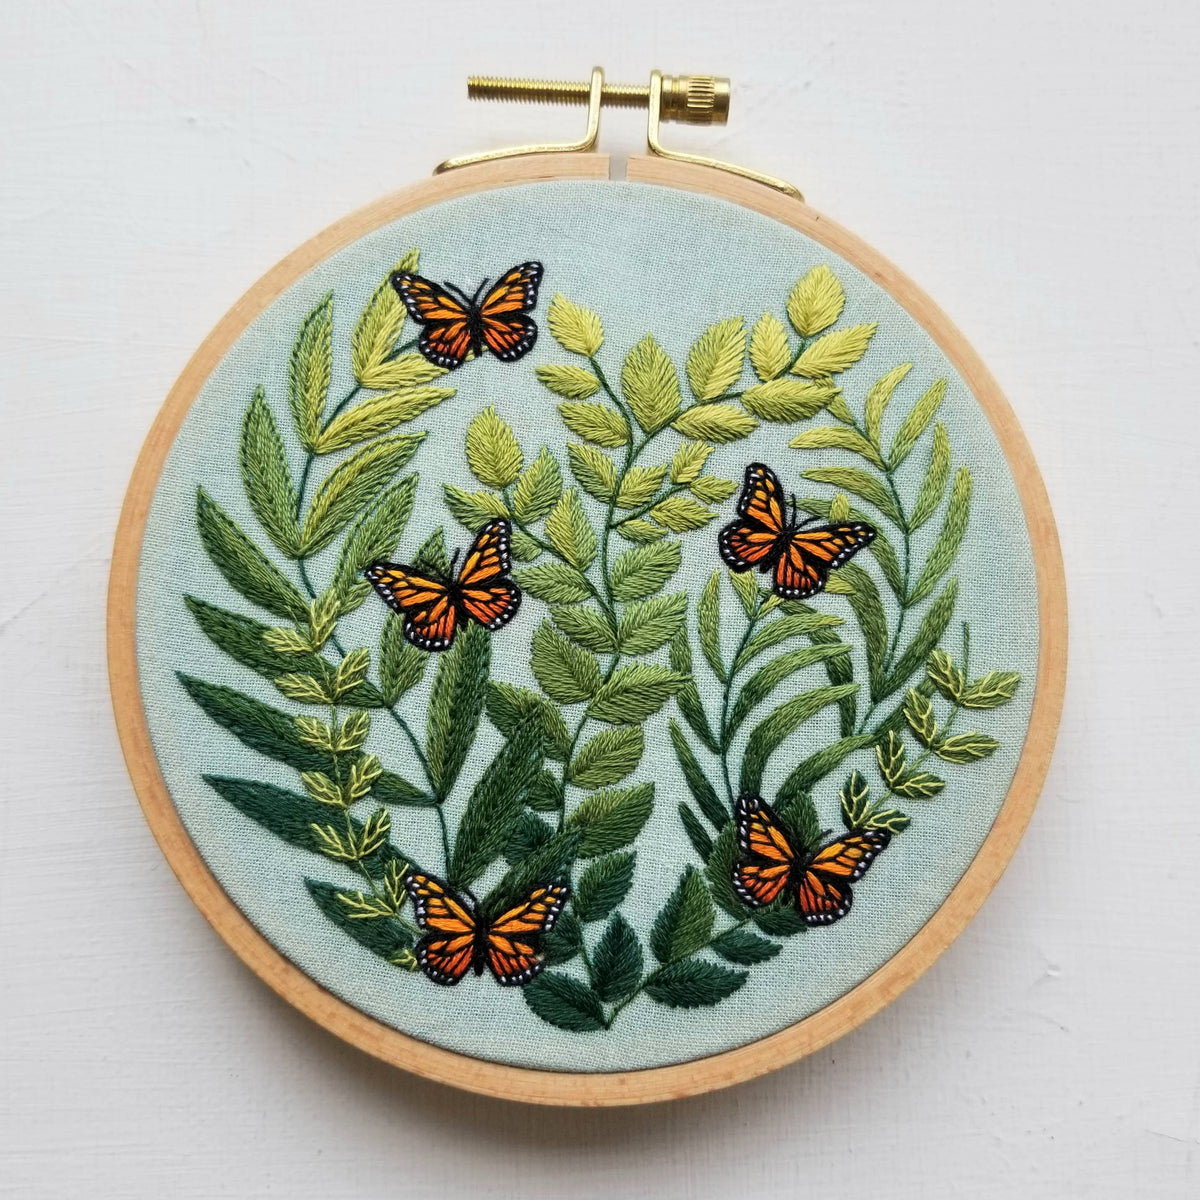 Jessica Long Embroidery "Love Grows" butterfly hand embroidery kit